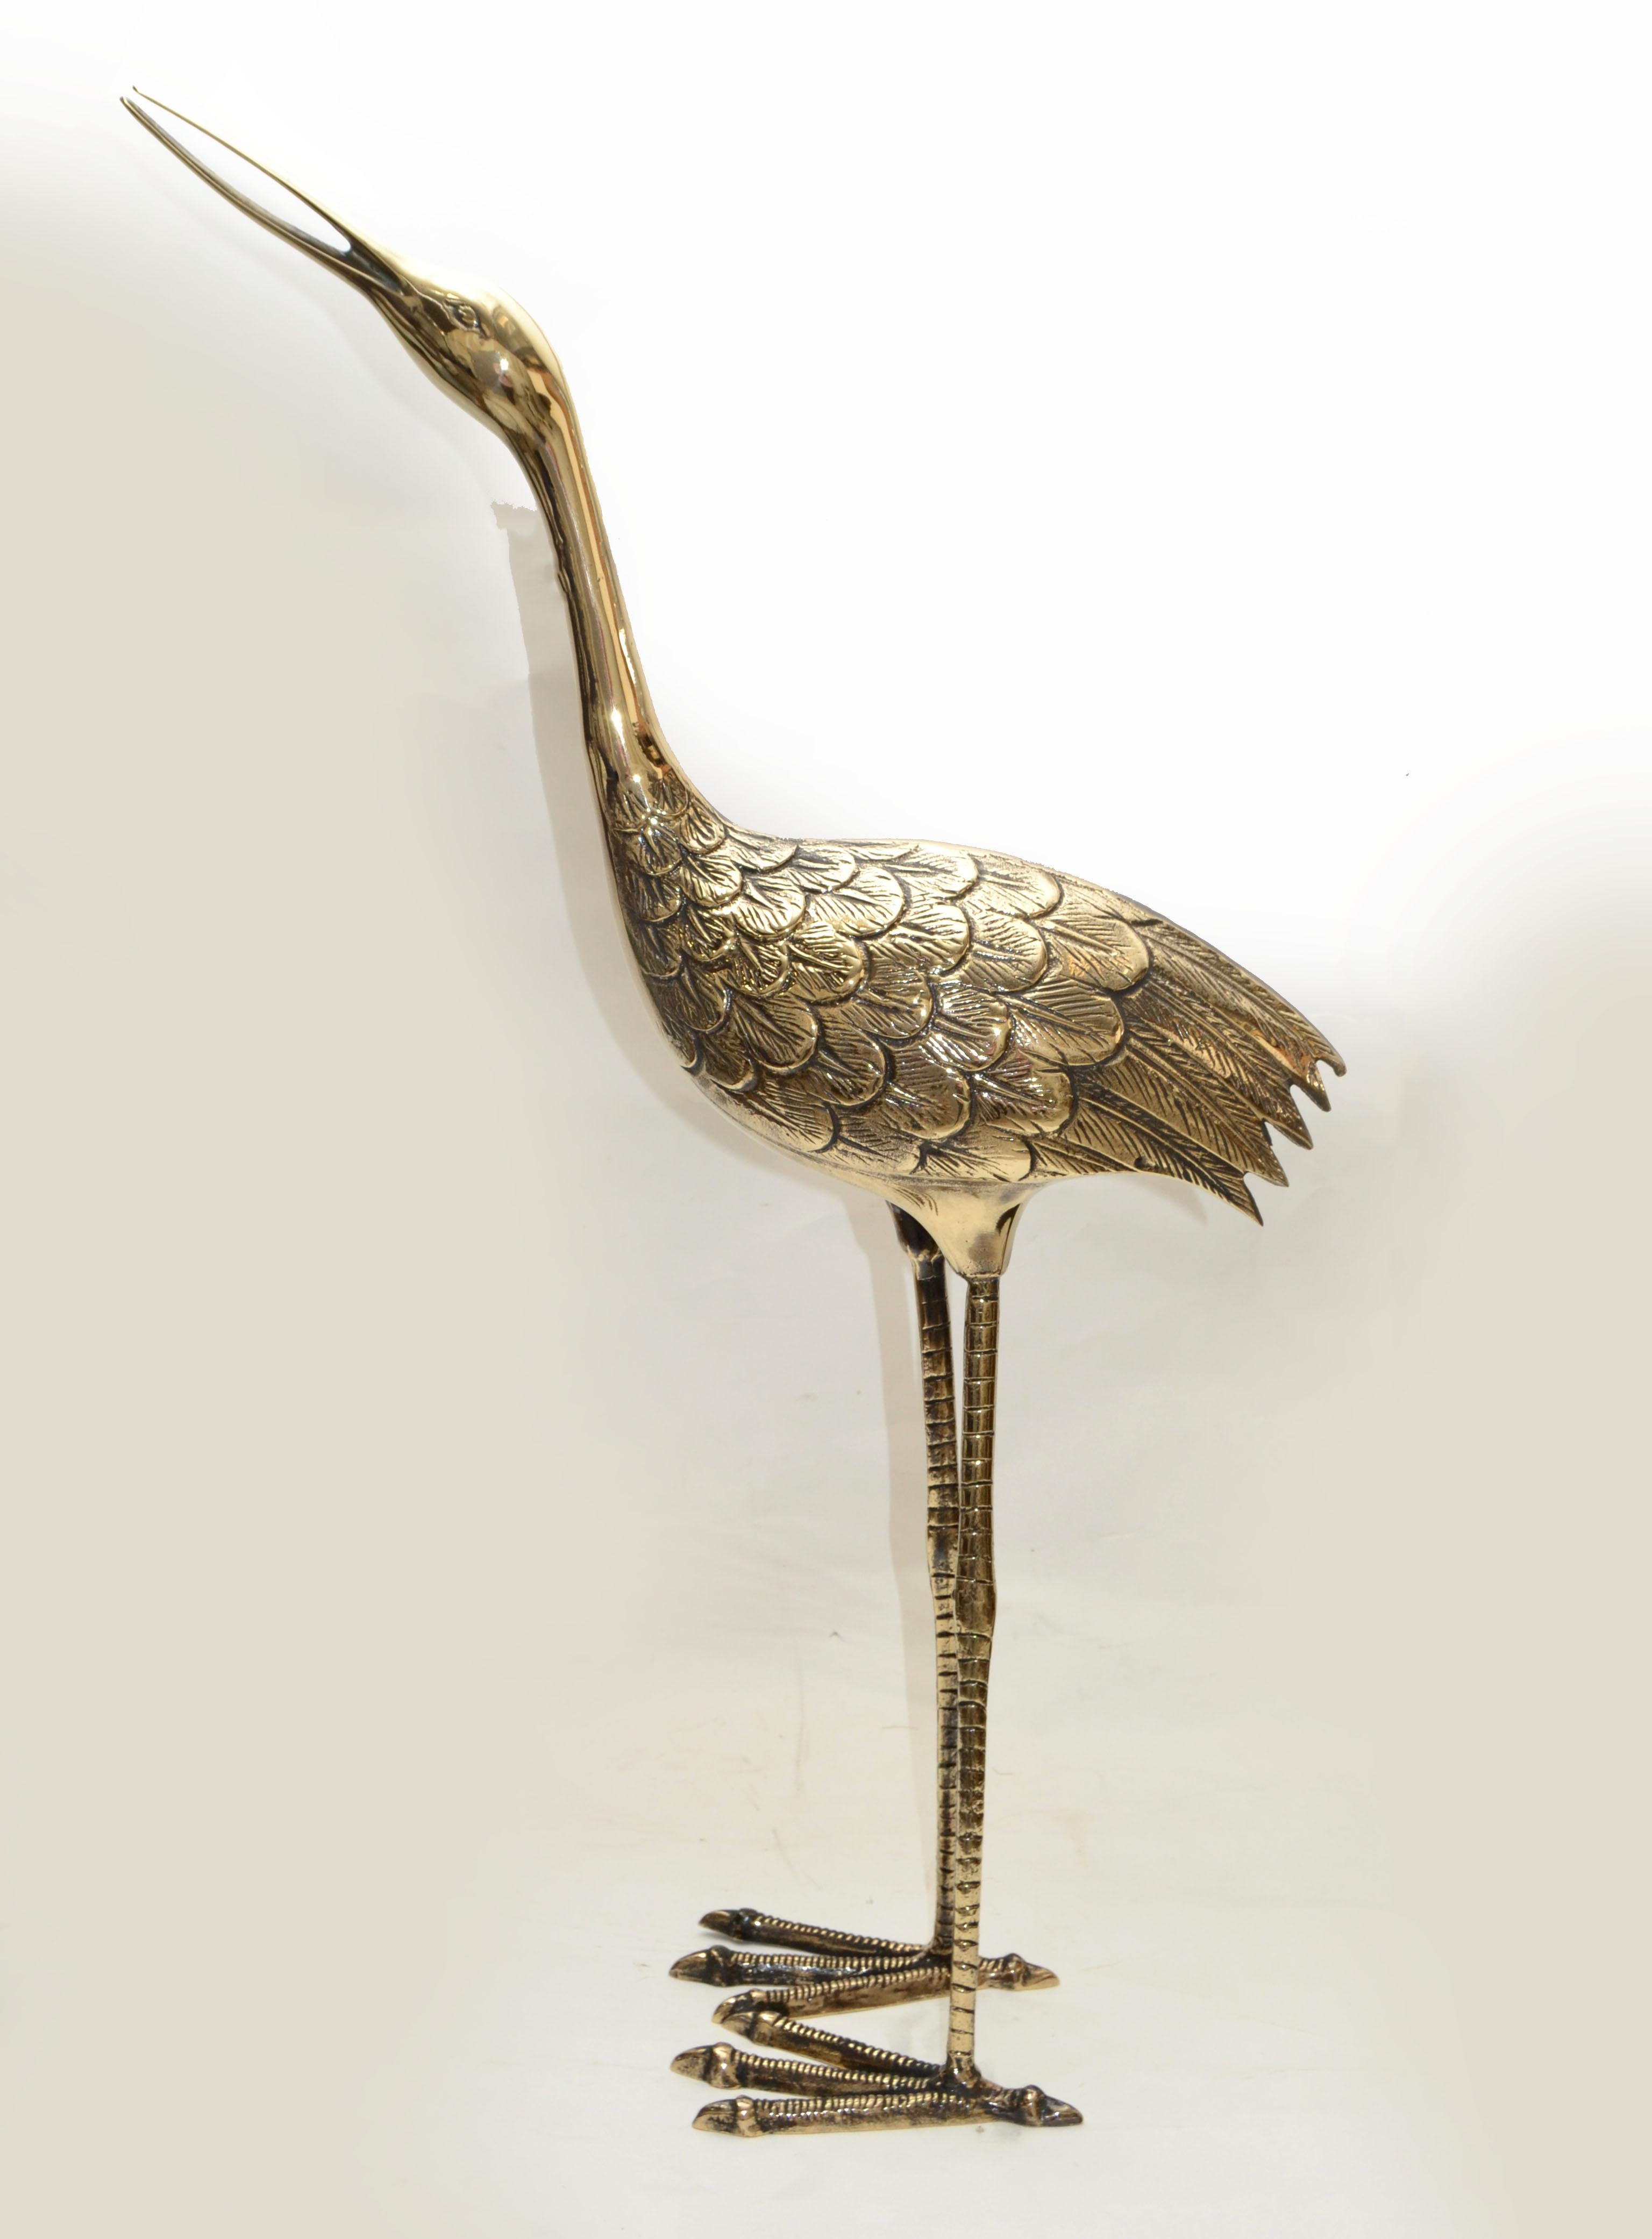 American Bronze Crane Life-Size Animal Sculpture Handcrafted Mid-Century Modern, 1970 For Sale